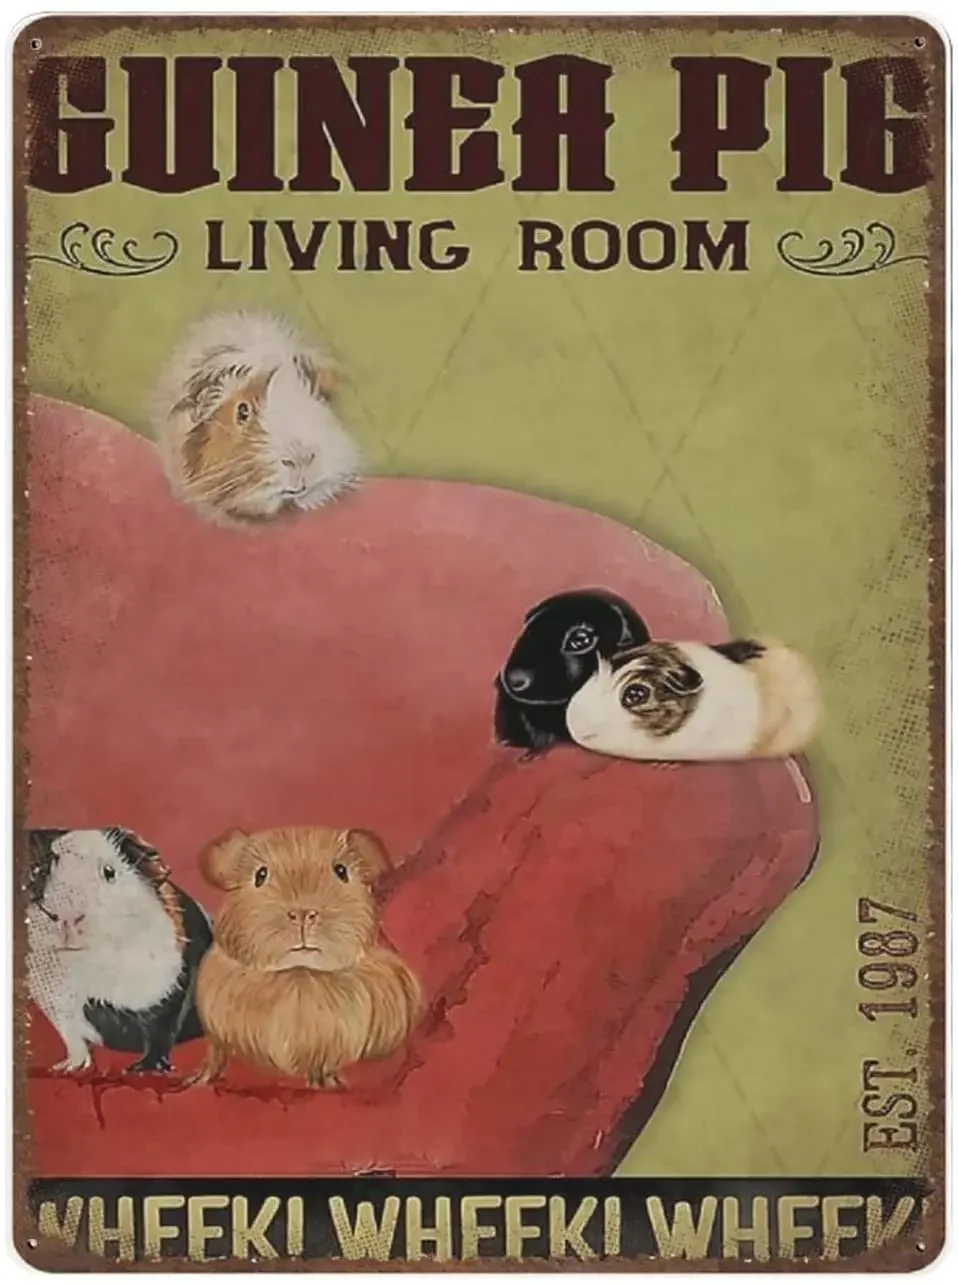 

Shabby Durable Thick Metal Sign,Guinea Pig Living Room Tin Sign Vintage Wall Decor Novelty for Home Kitchen Cafe Bar Man Cave